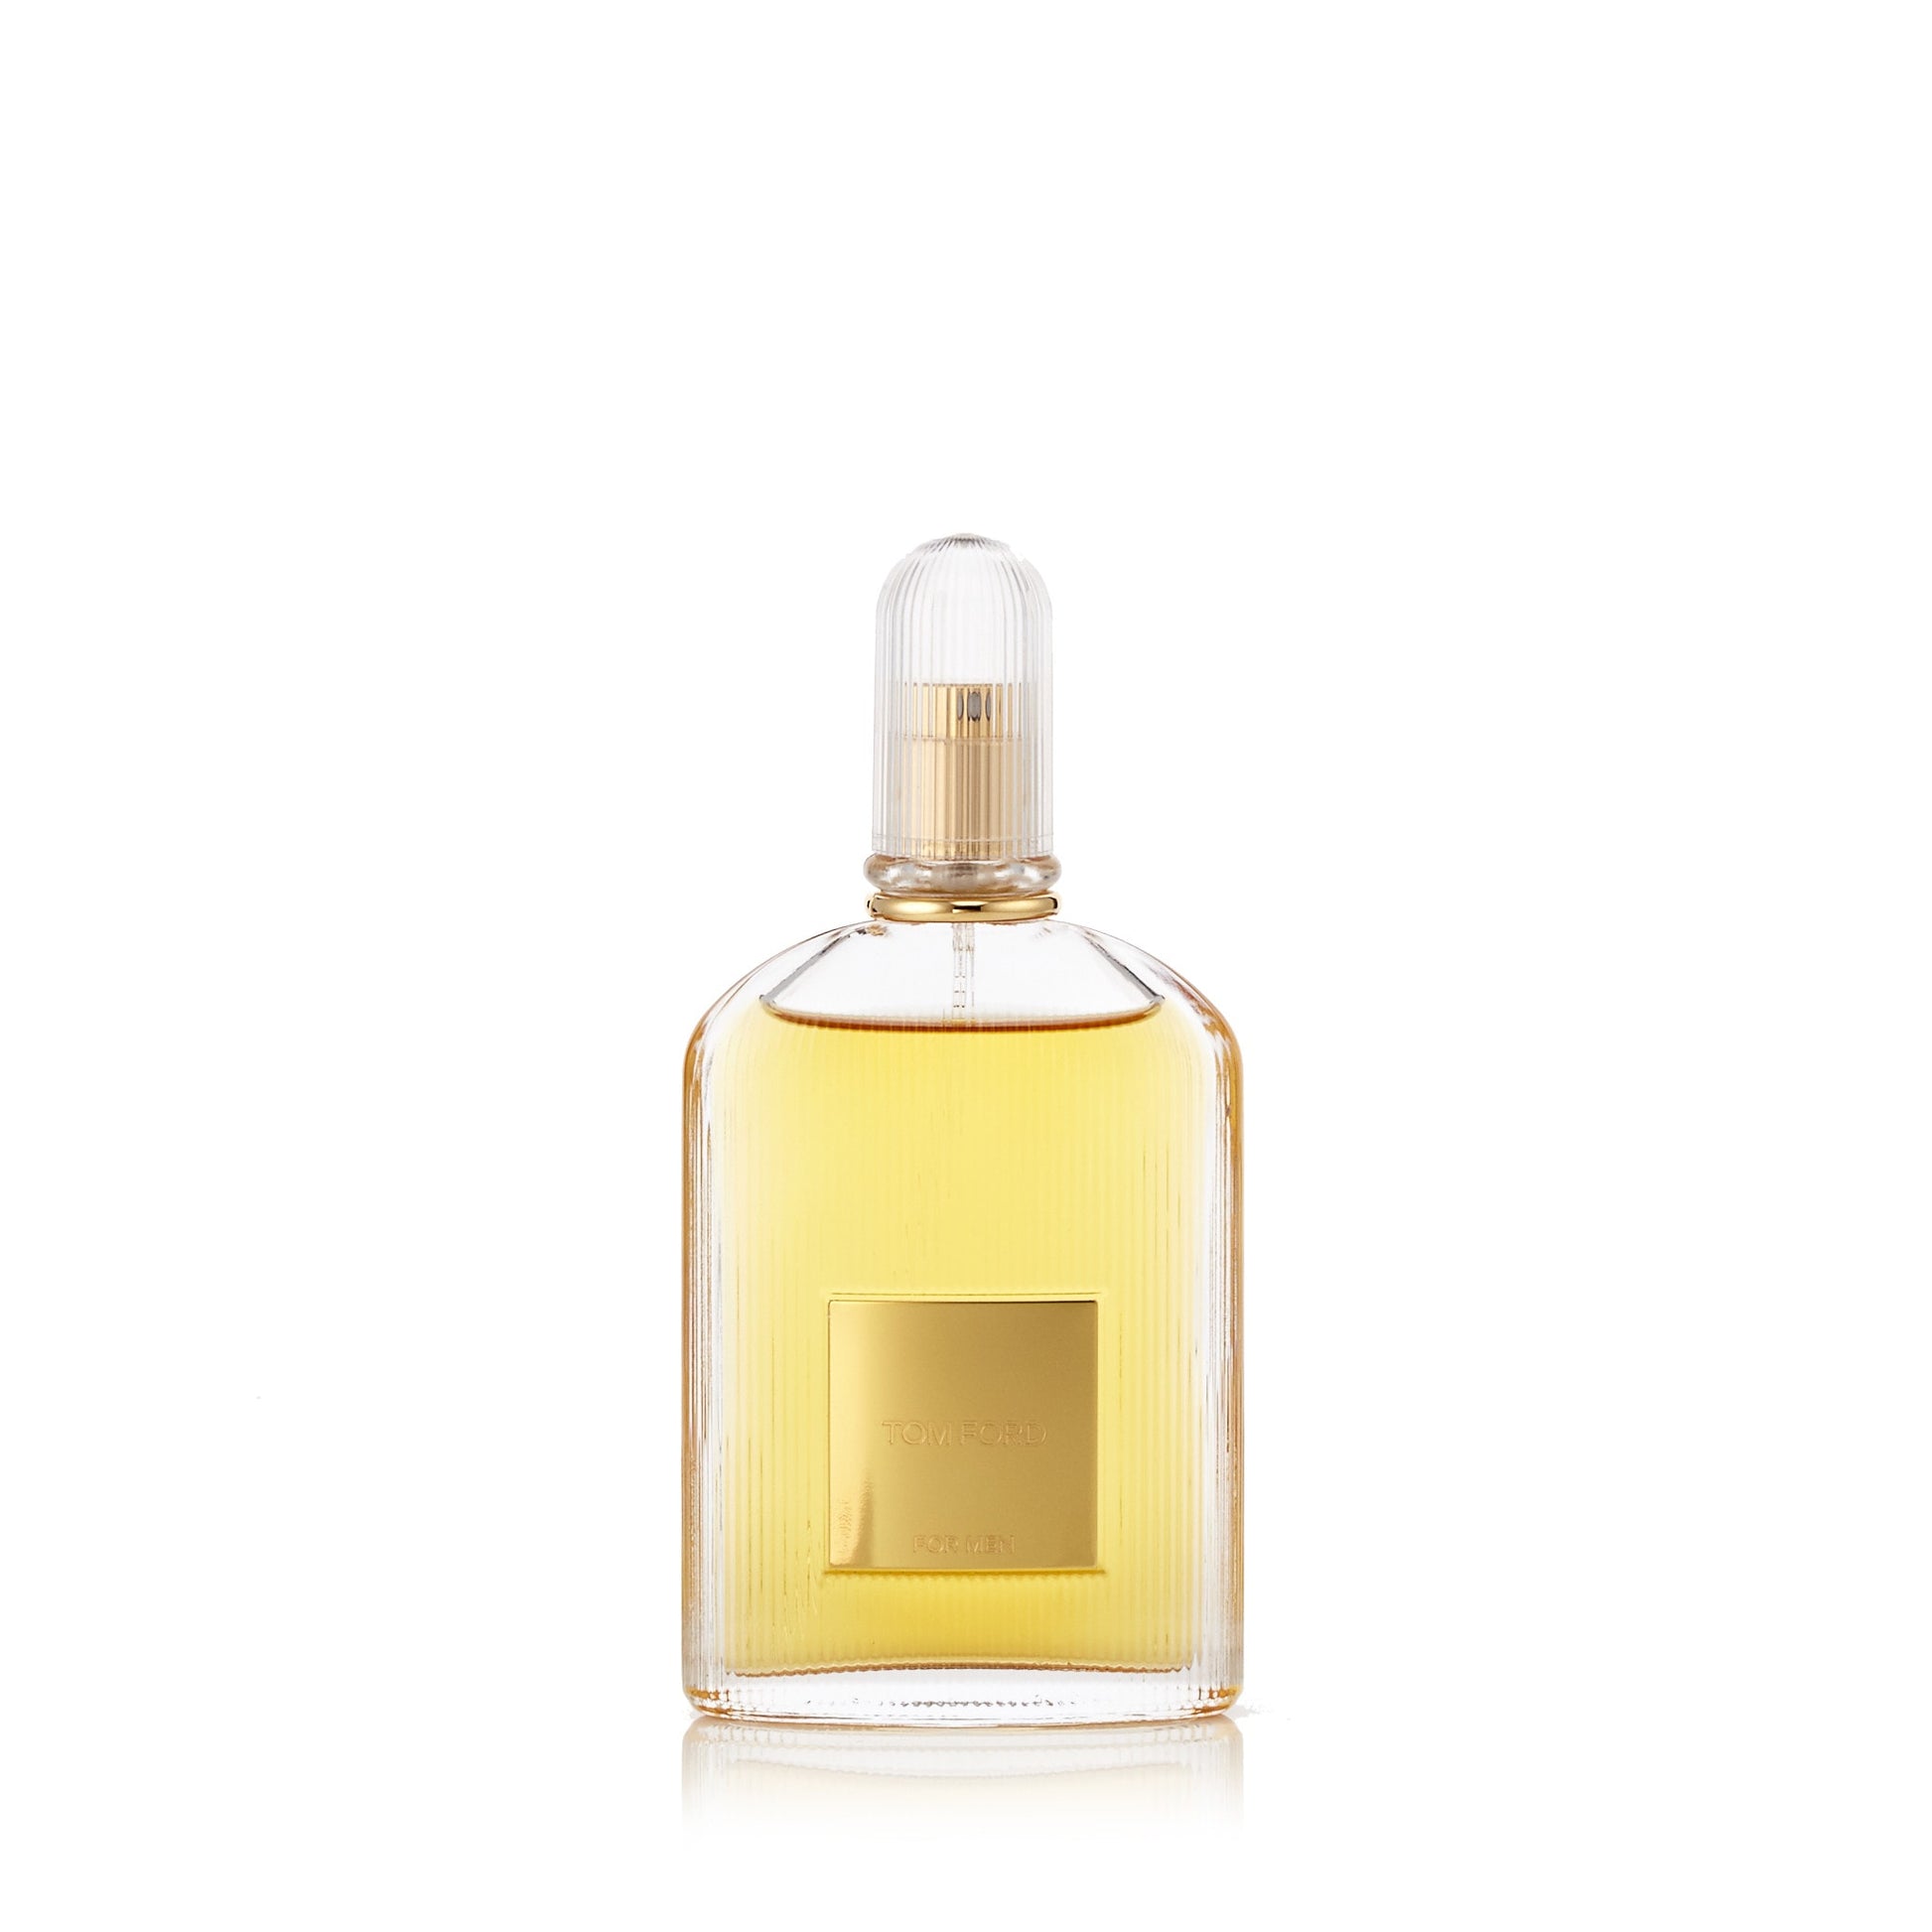 Tom Ford Eau de Toilette Spray for Men by Tom Ford, Product image 3